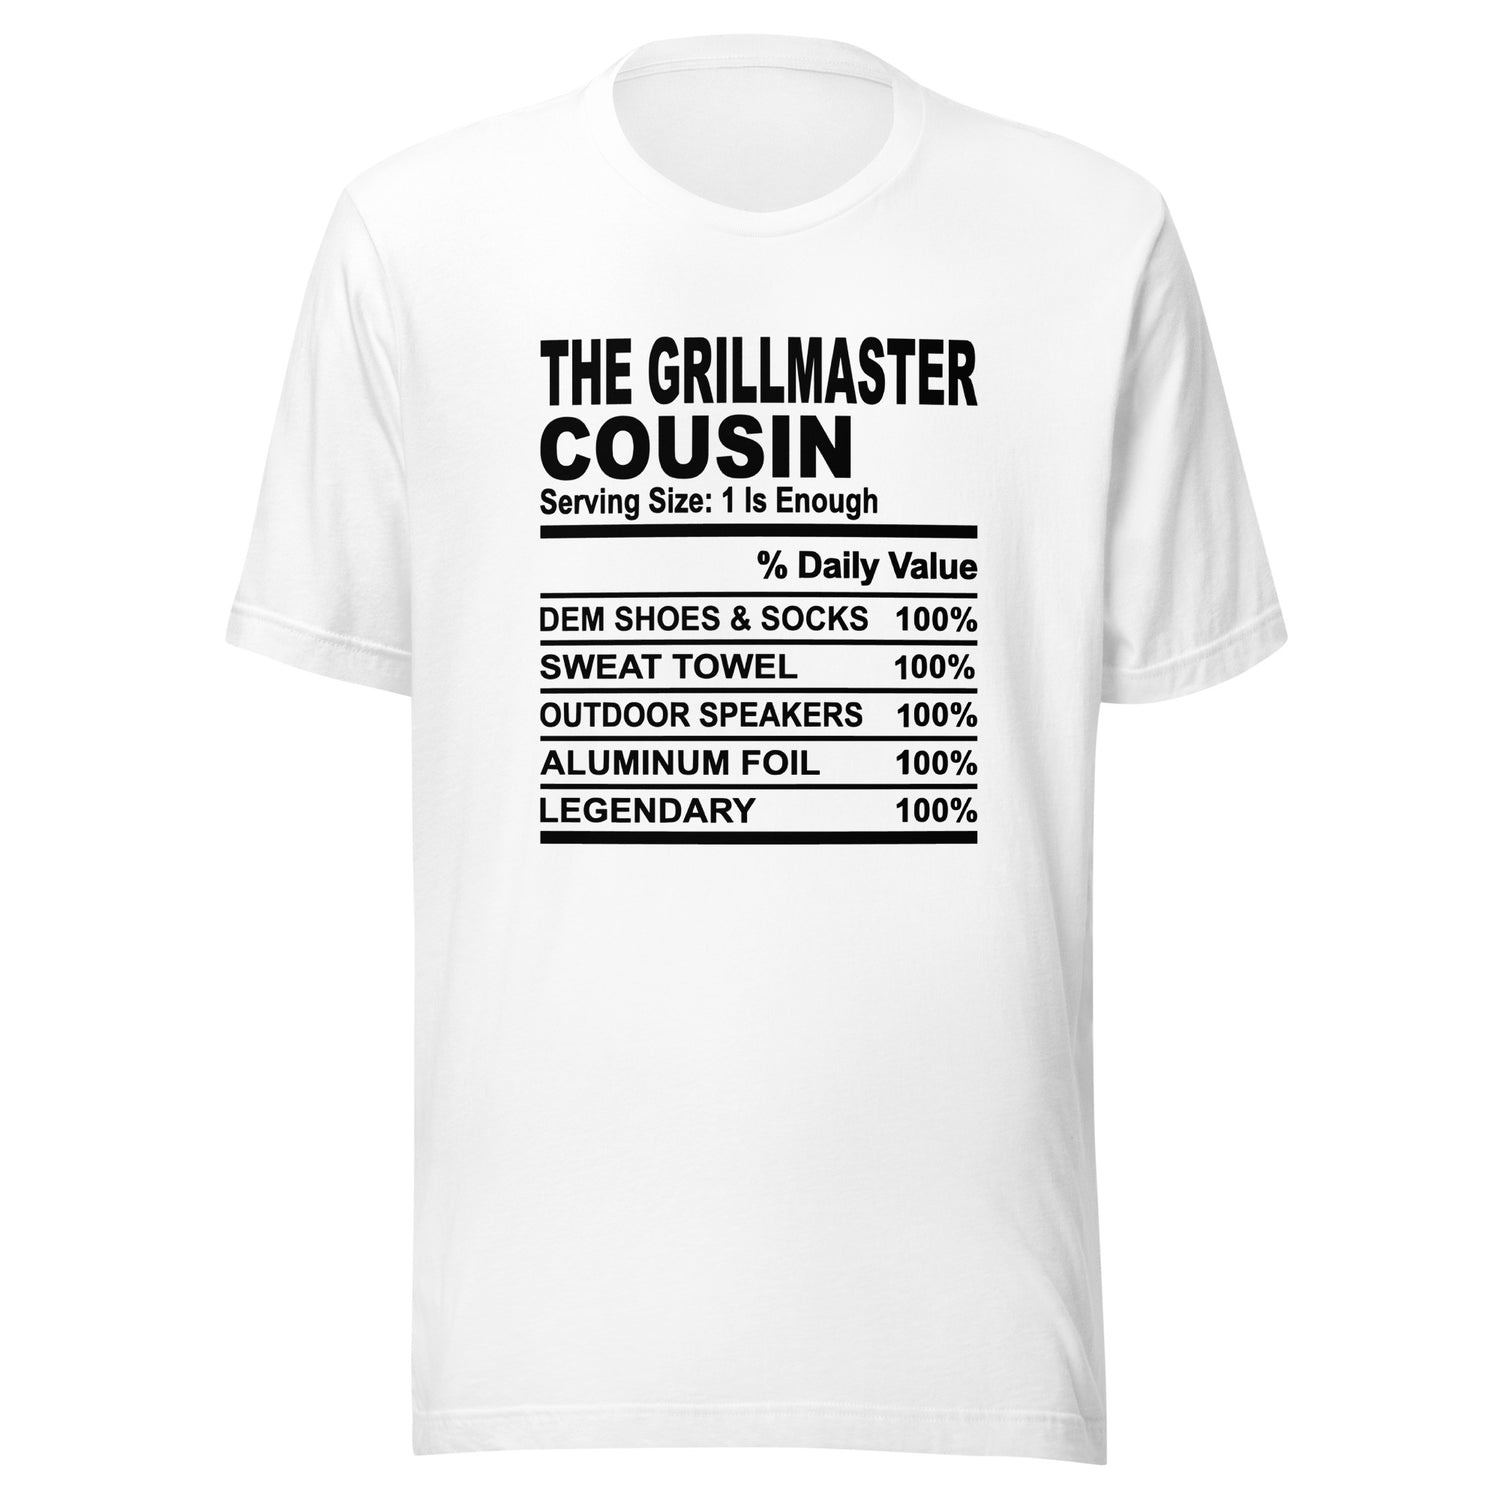 Grillmaster Cousin Tees